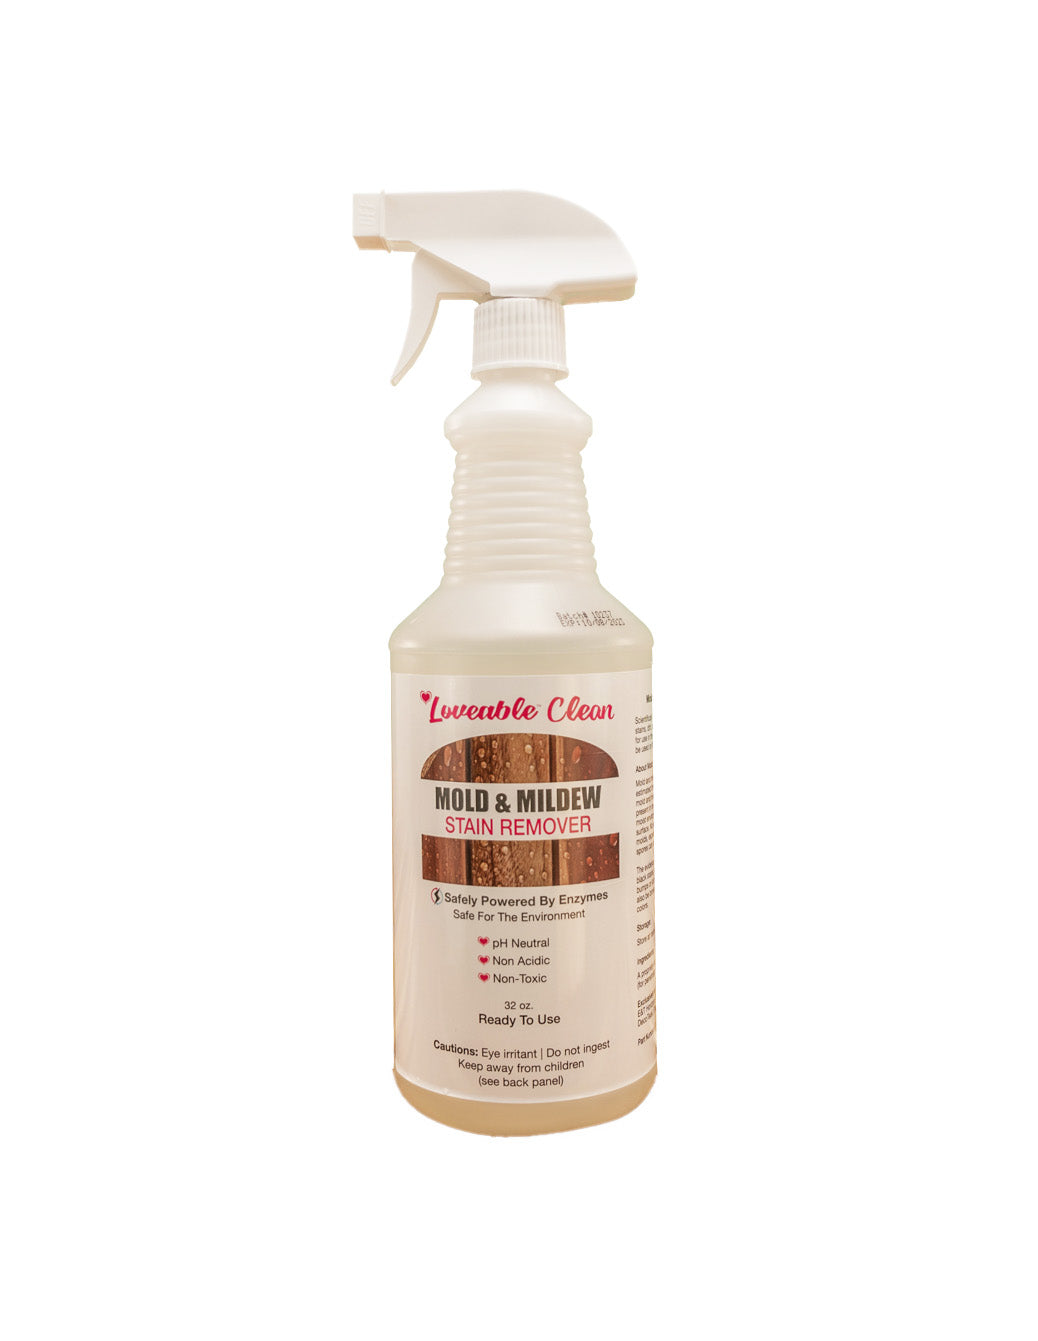 EcoDecors Complete Teak Care Bundle - 24oz Teak oil, 32oz Cleaner, 16oz Protexion, and 32oz Stain Remover